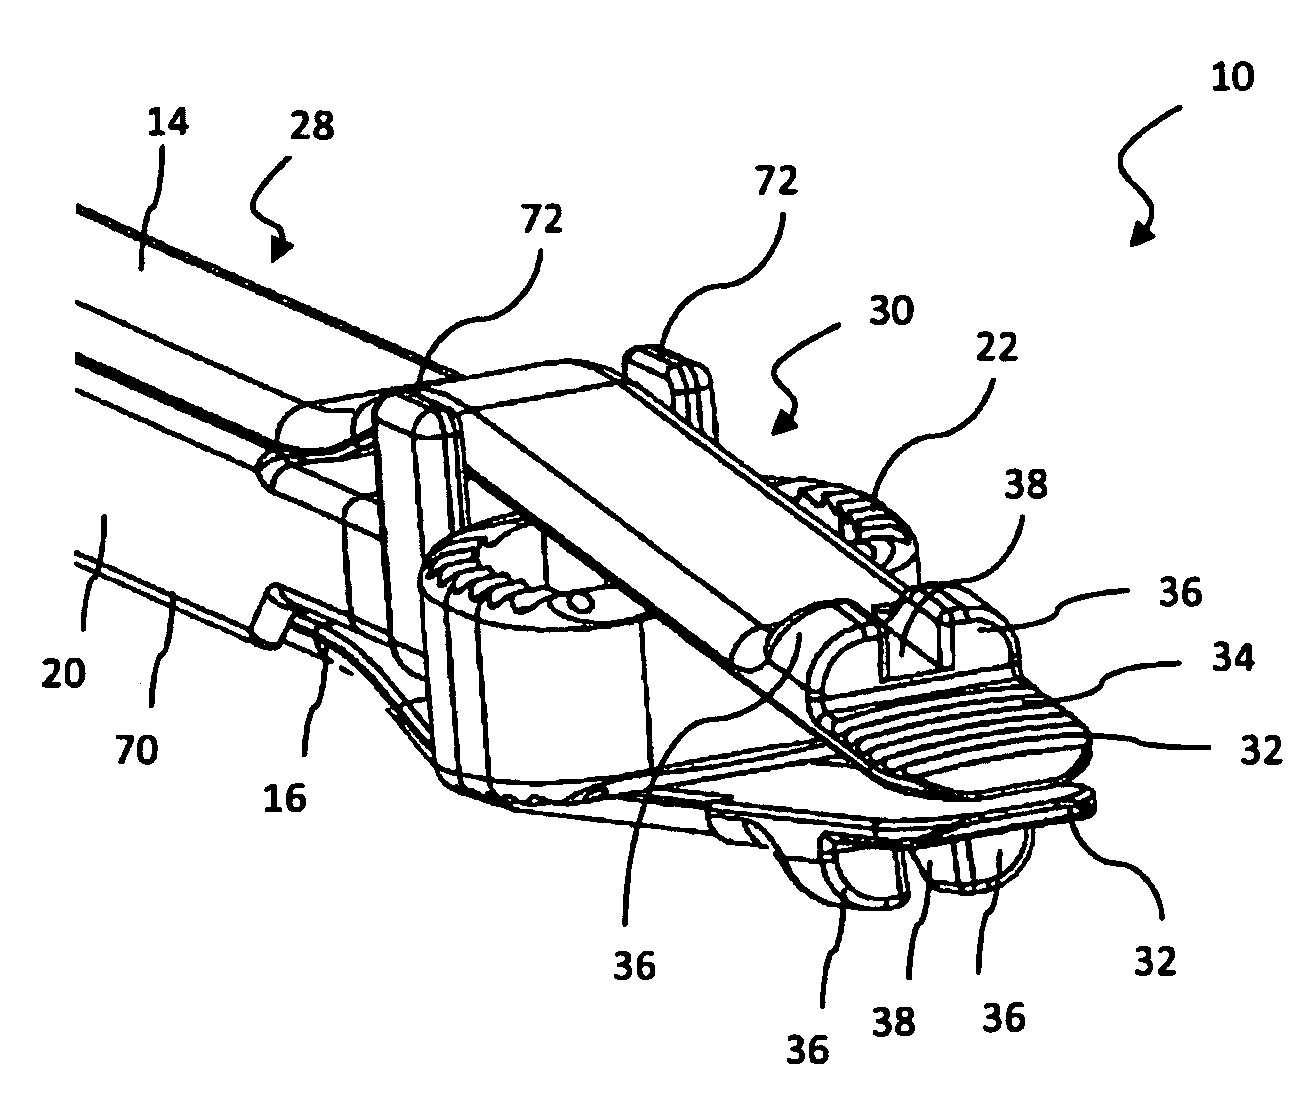 Spinal implant installation device